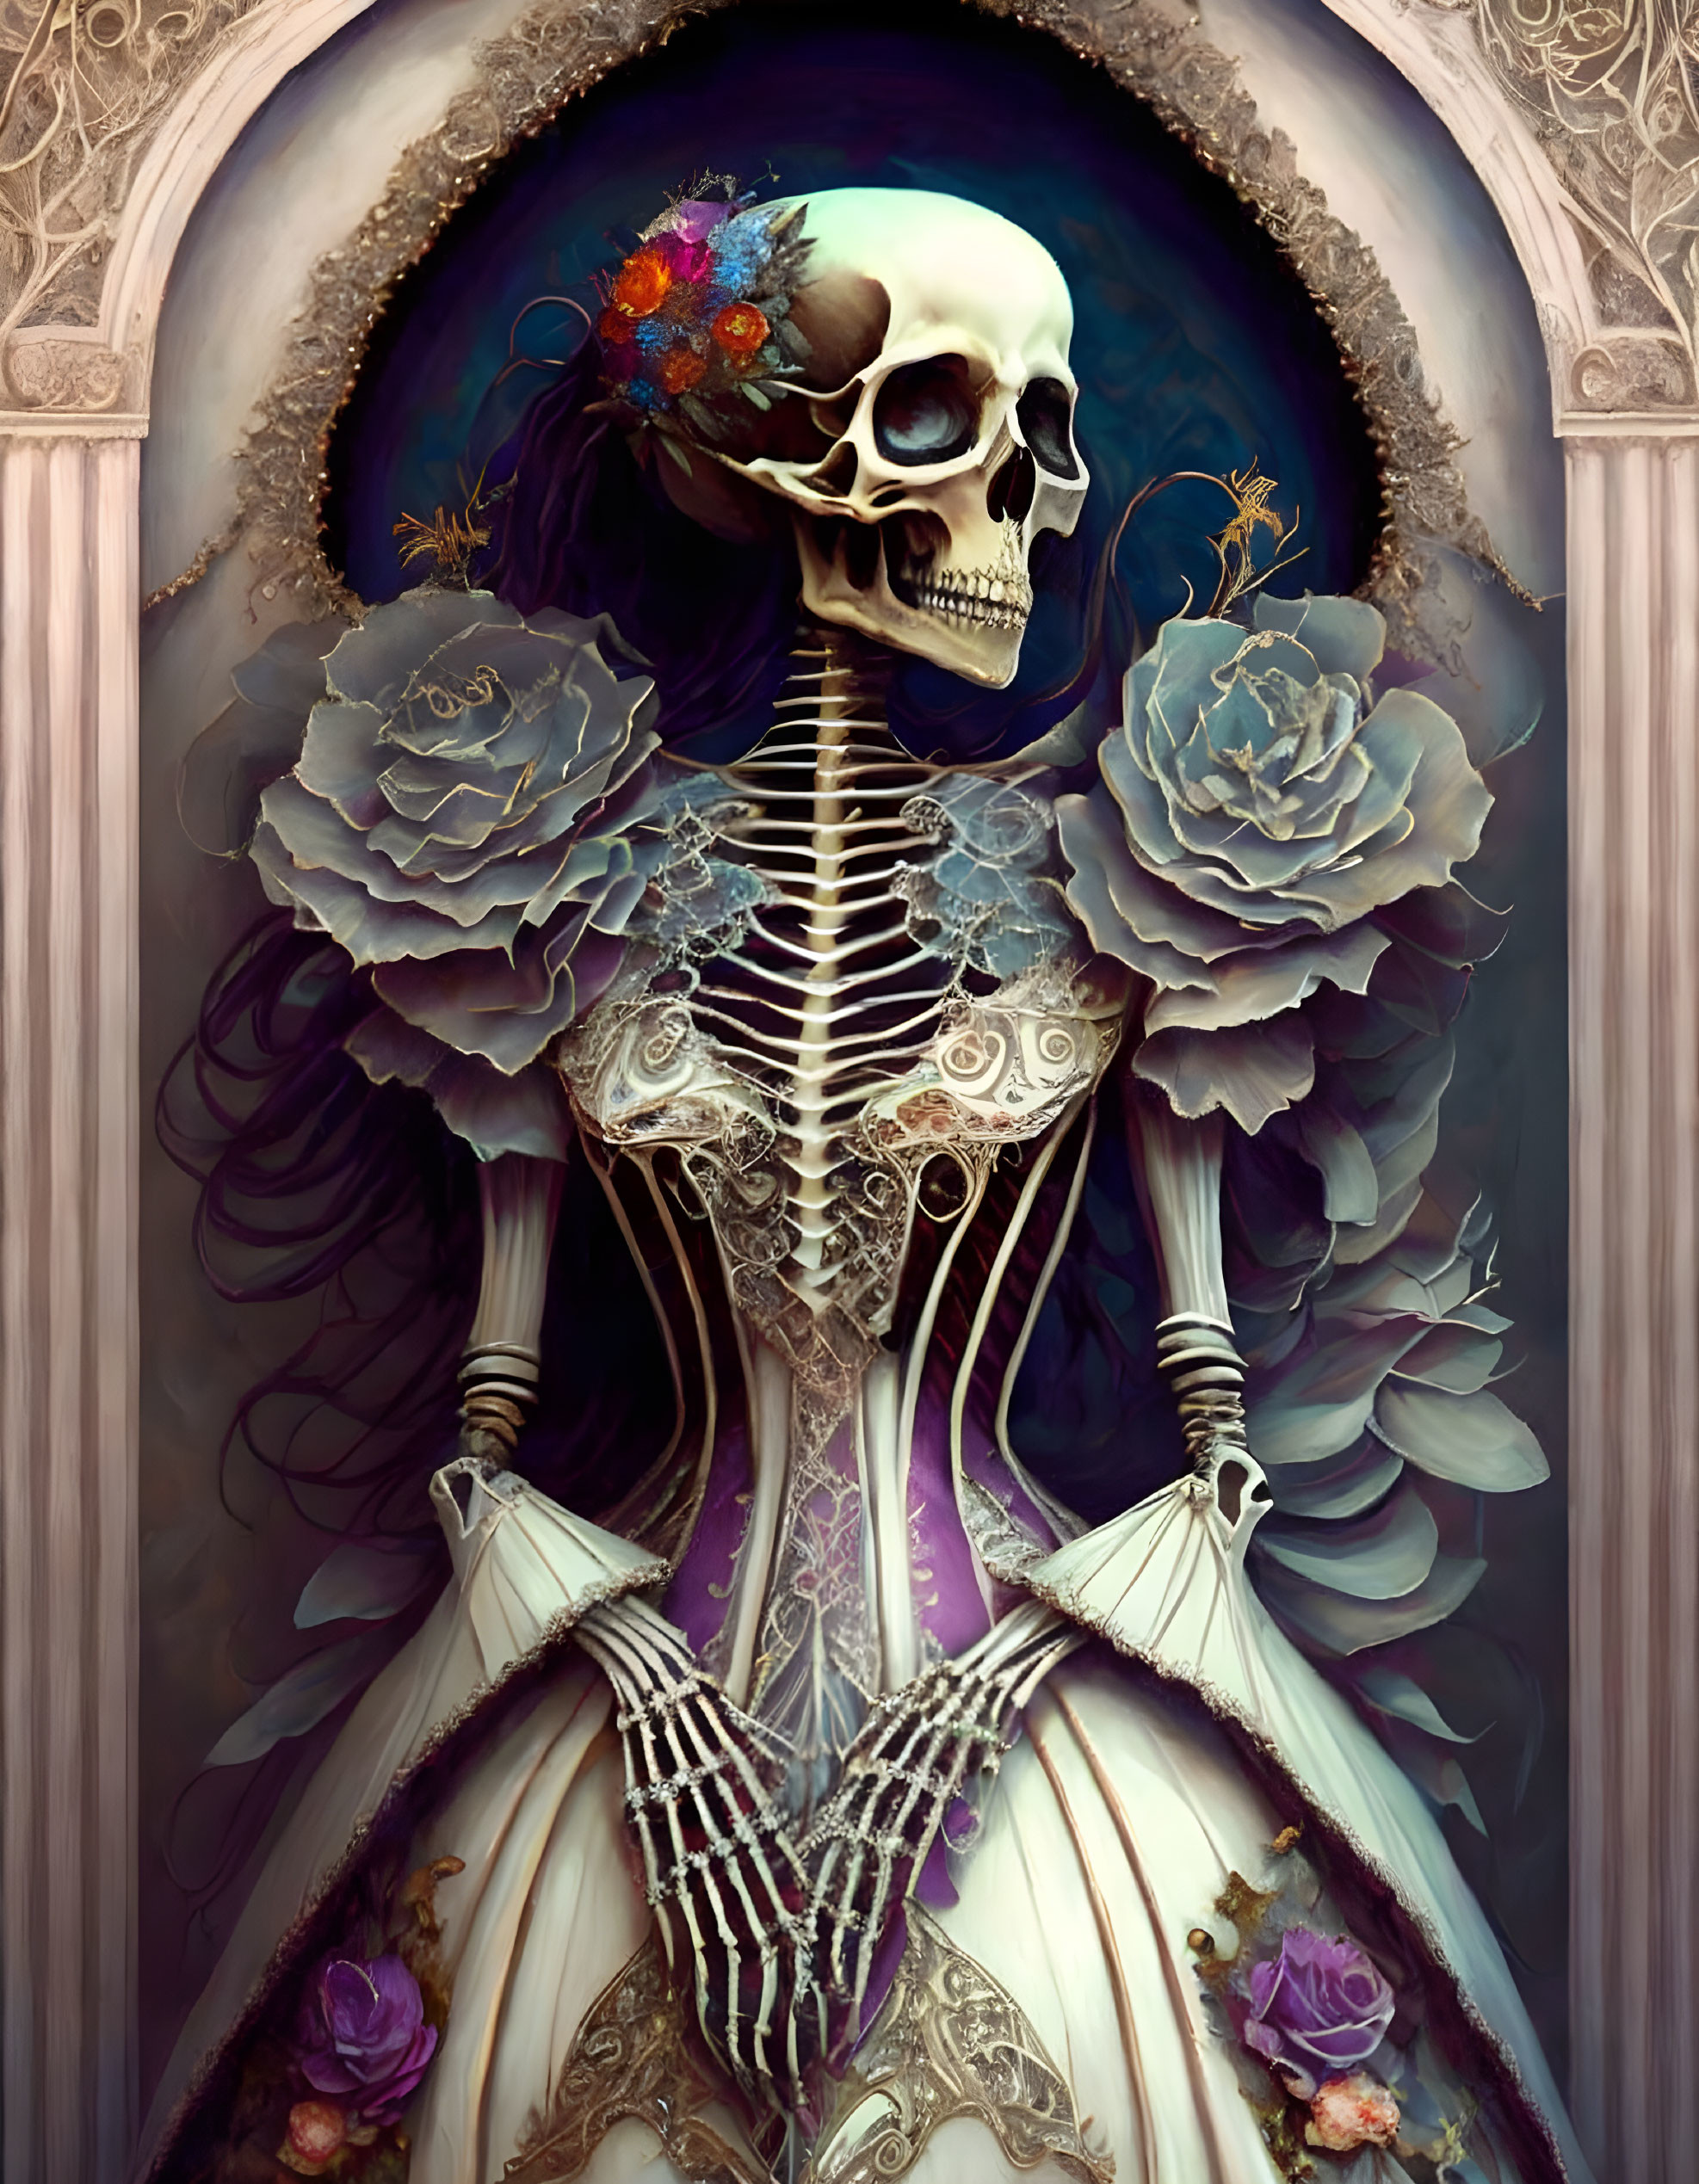 Skeleton in a bridal gown